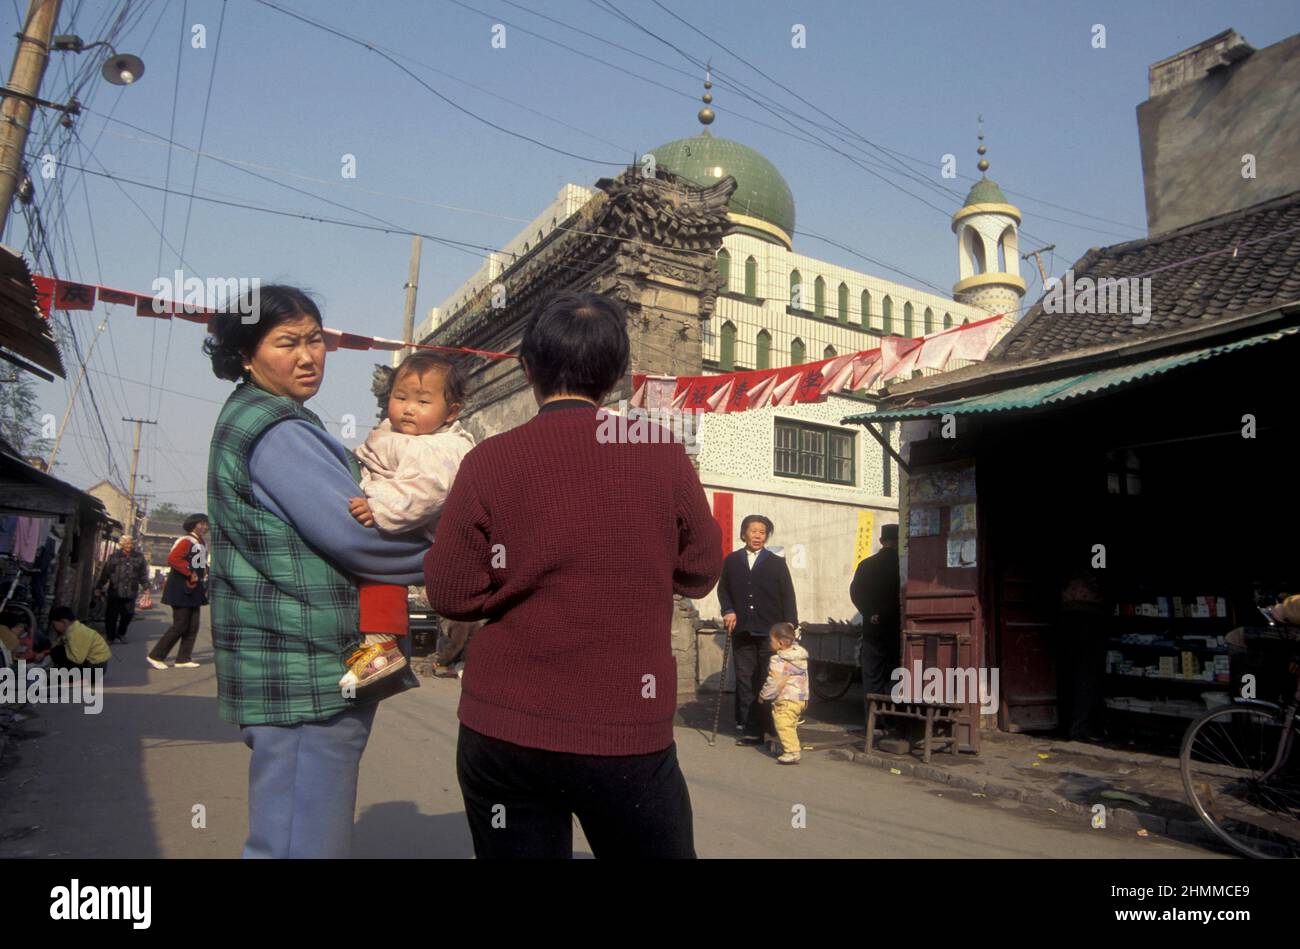 the mosque of Kaifeng in the City of Kaifeng in the Province of Henan in China.  China, Kaifeng, November, 1996 Stock Photo